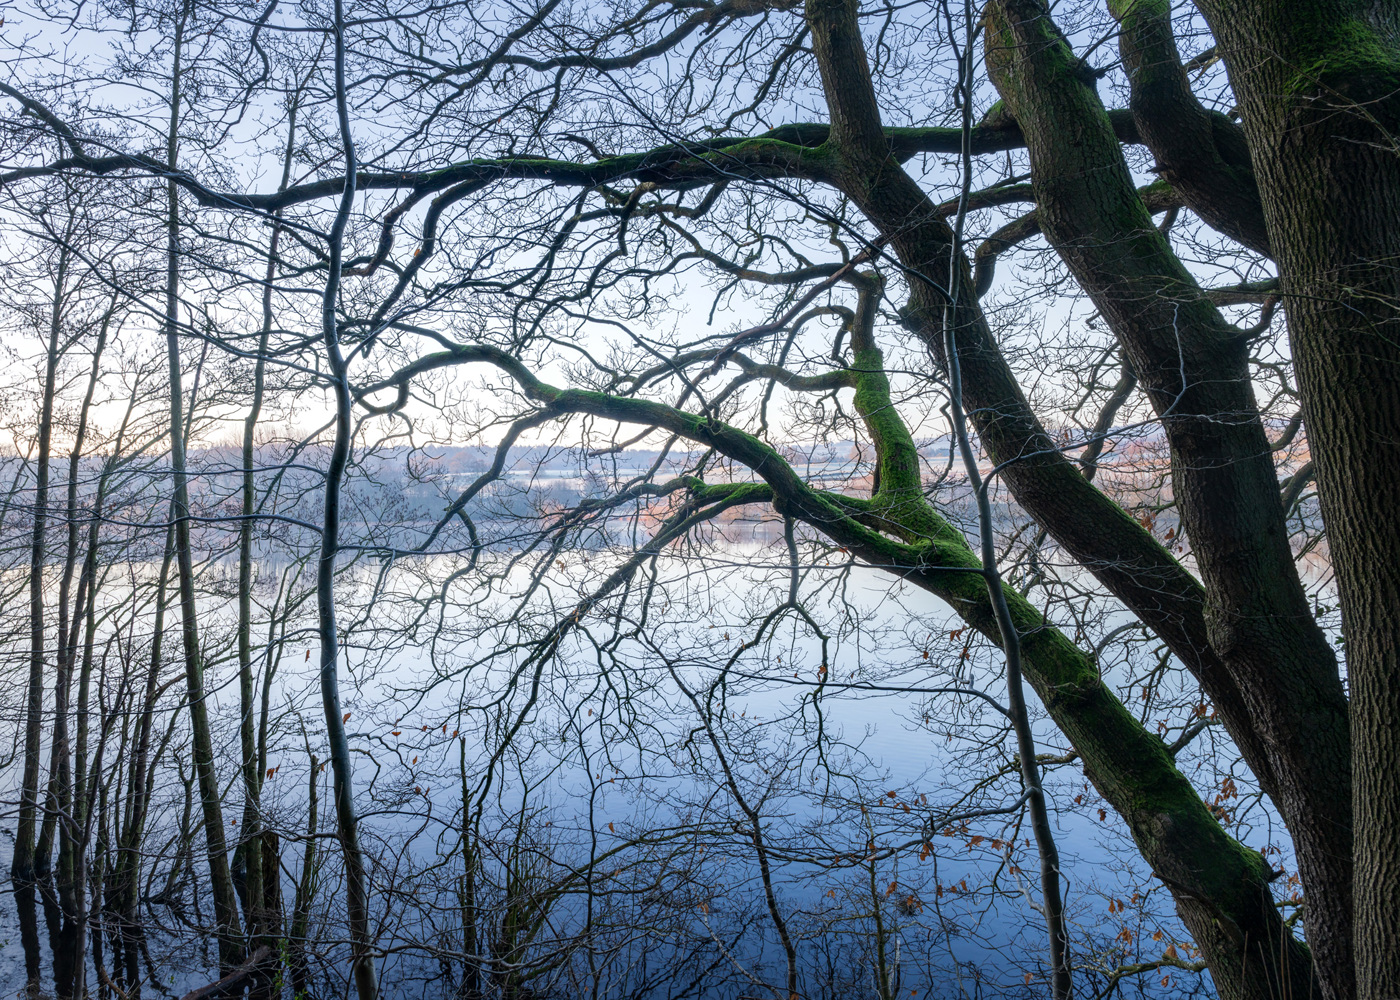 This is a tranquil scene at a North Yorkshire reservoir. Bare trees with intricate branches frame the view, some covered in patches of moss. The still water mirrors the sky and tree silhouettes.